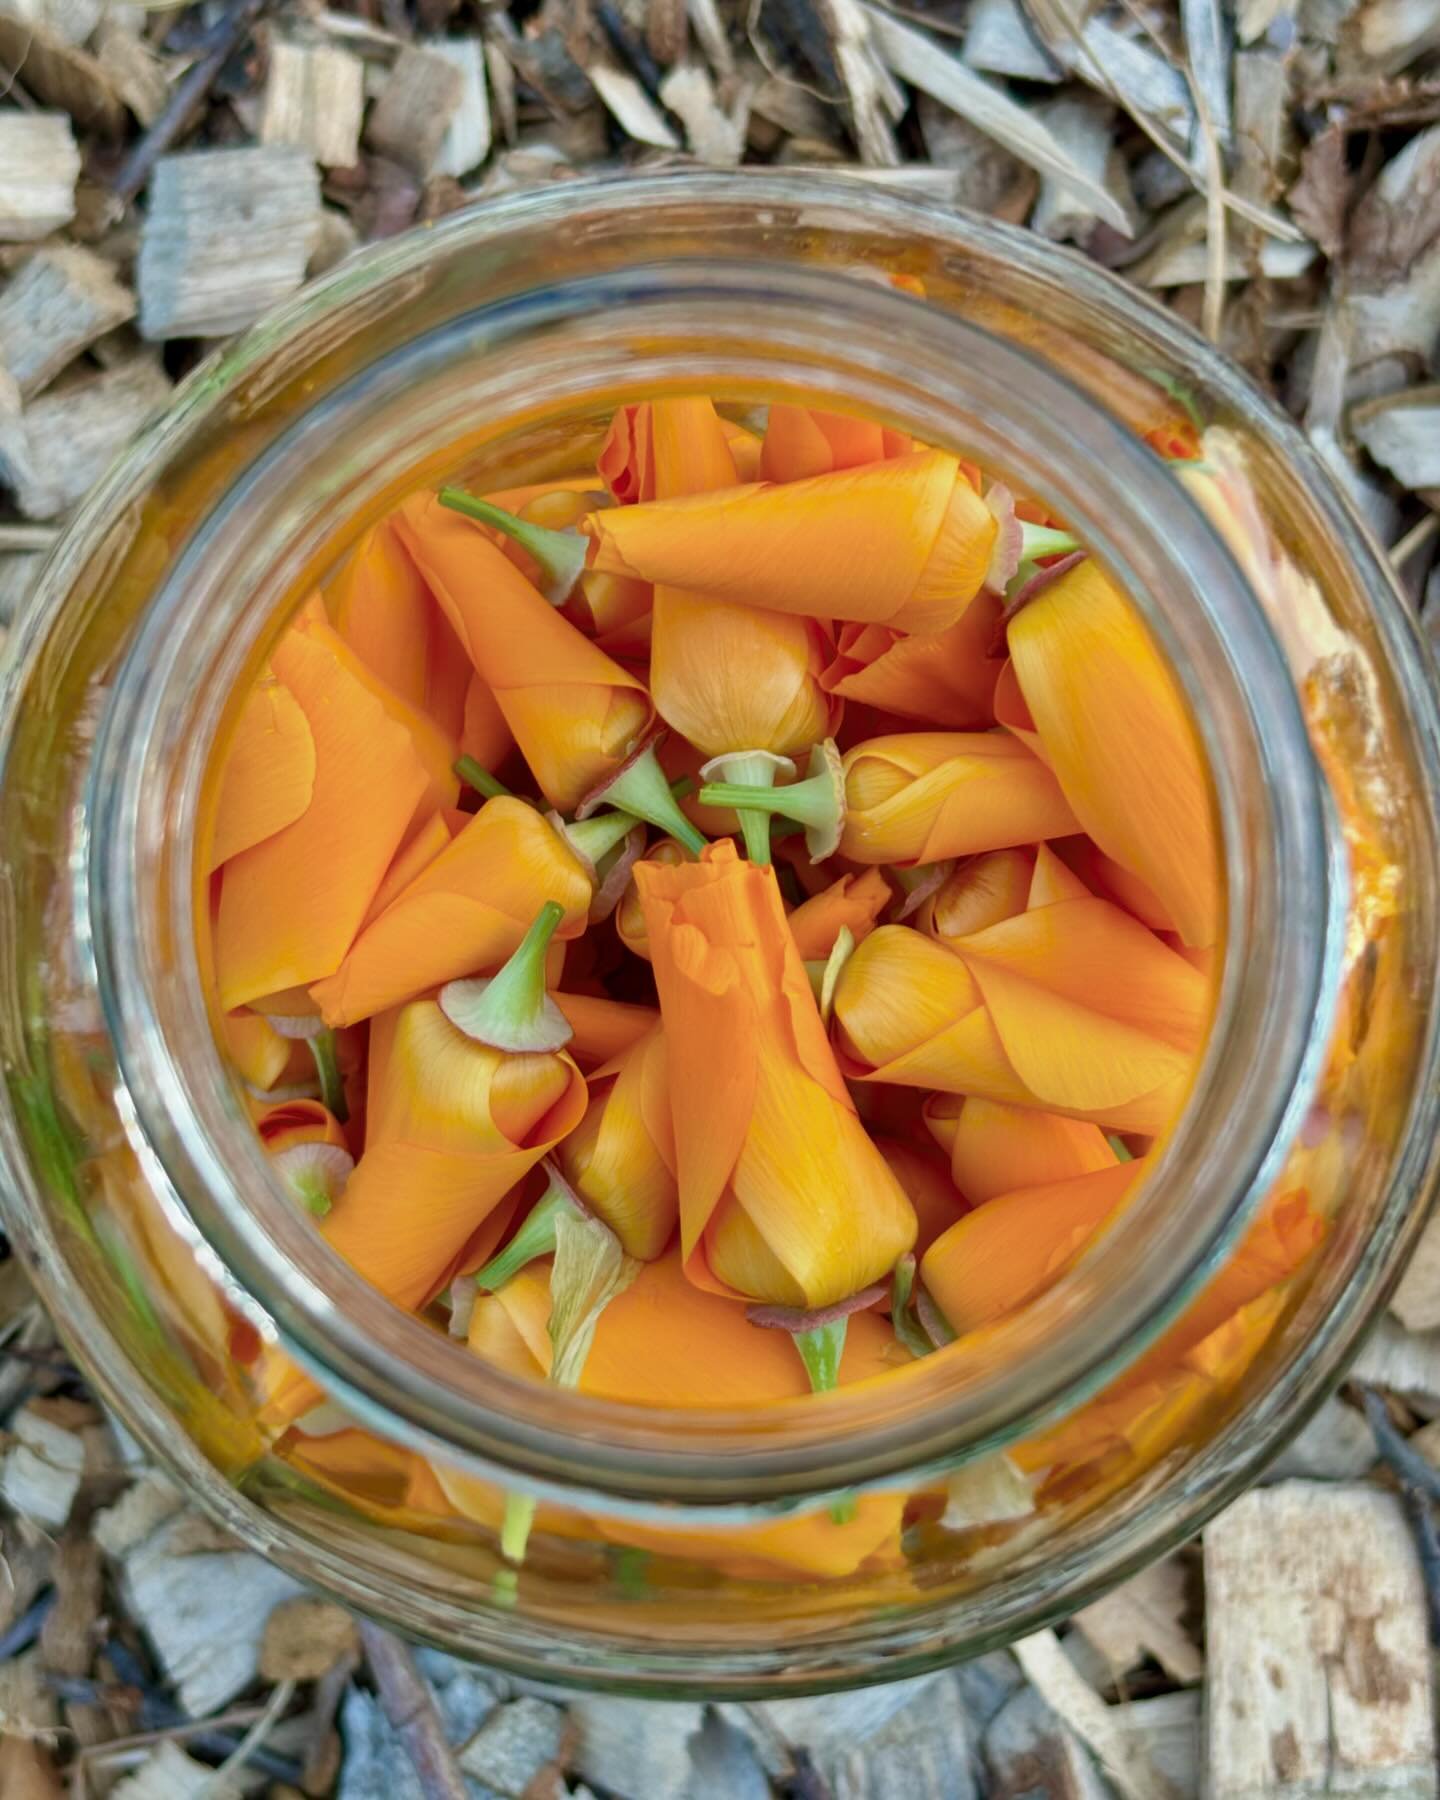 Taking a moment to appreciate the simple joy of freshly picked California Poppies, hand selected for my friend @xo.air as she concocts a calming tincture. 

As I delve into the world of herbalism, I&rsquo;m excited to explore the intuitive side of cr